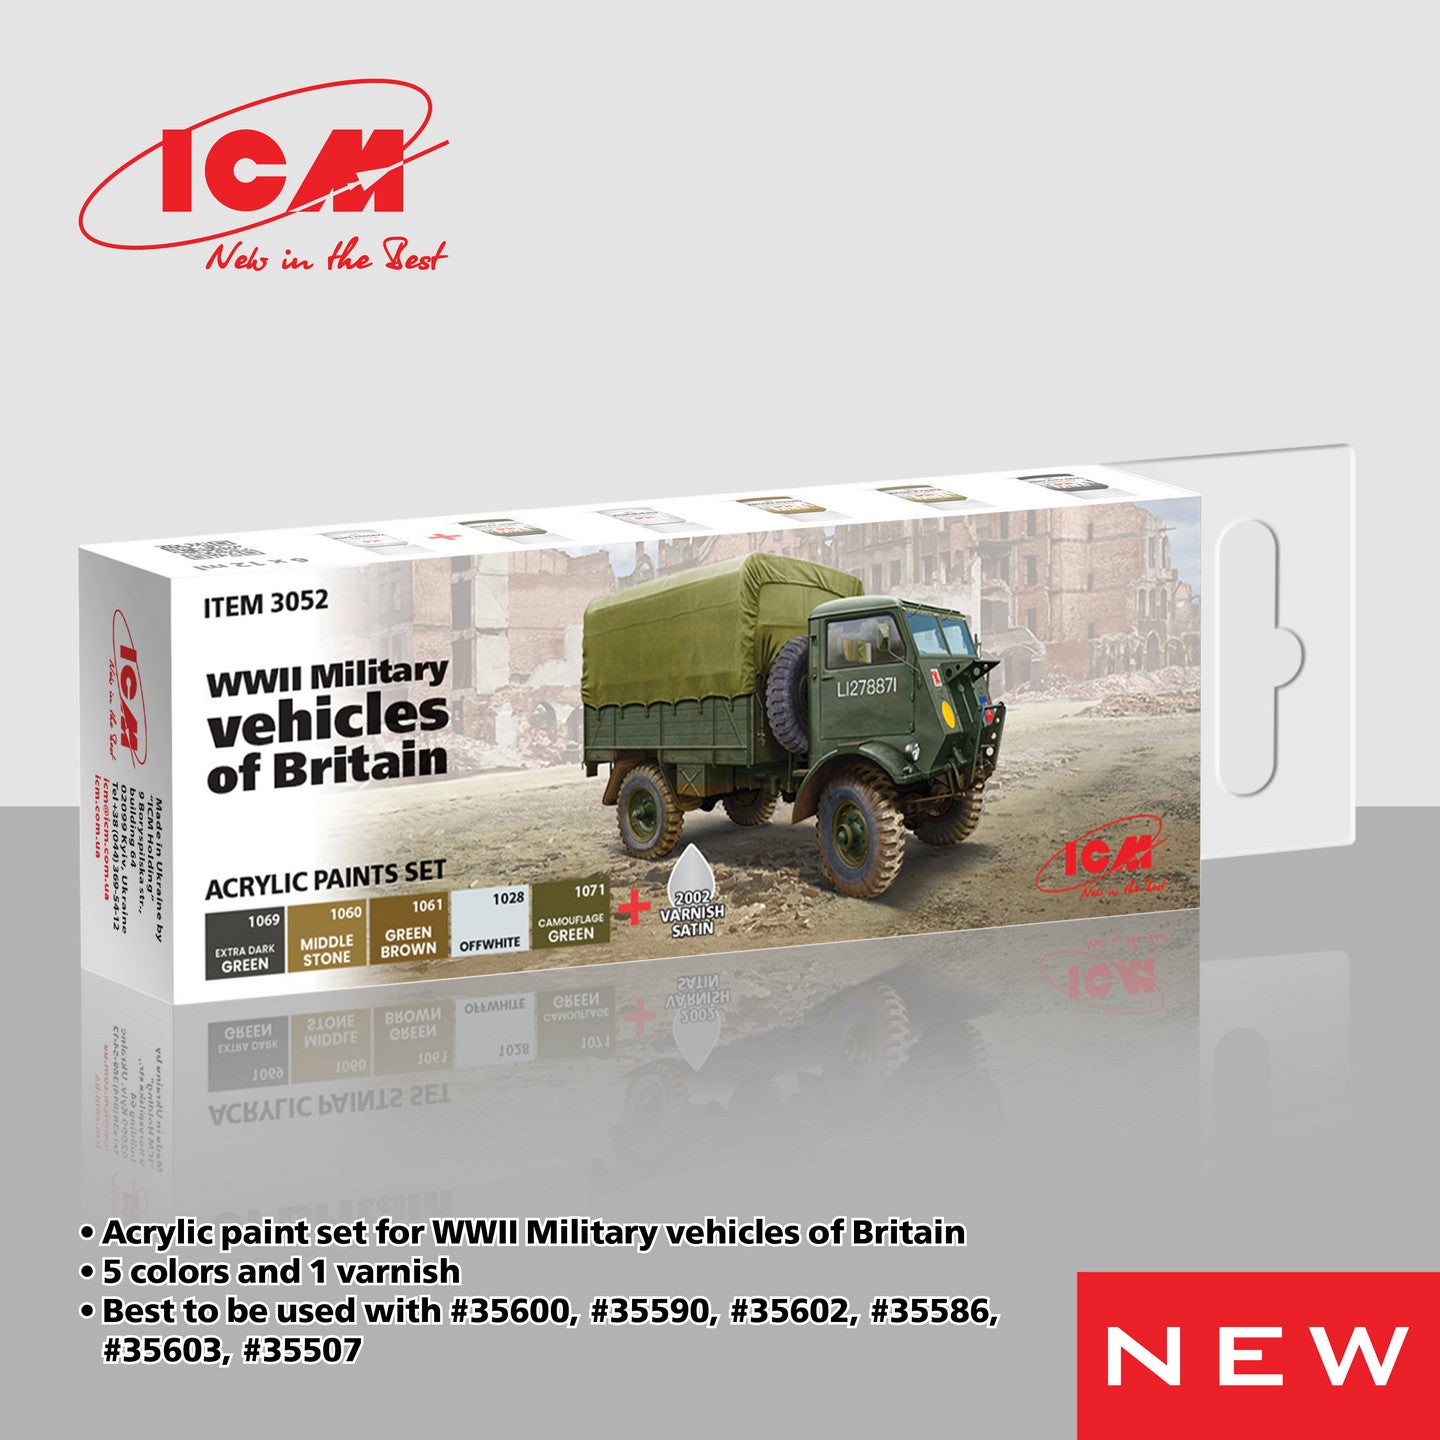 ICM Paint Set - WWII Military Vehicles of Britain